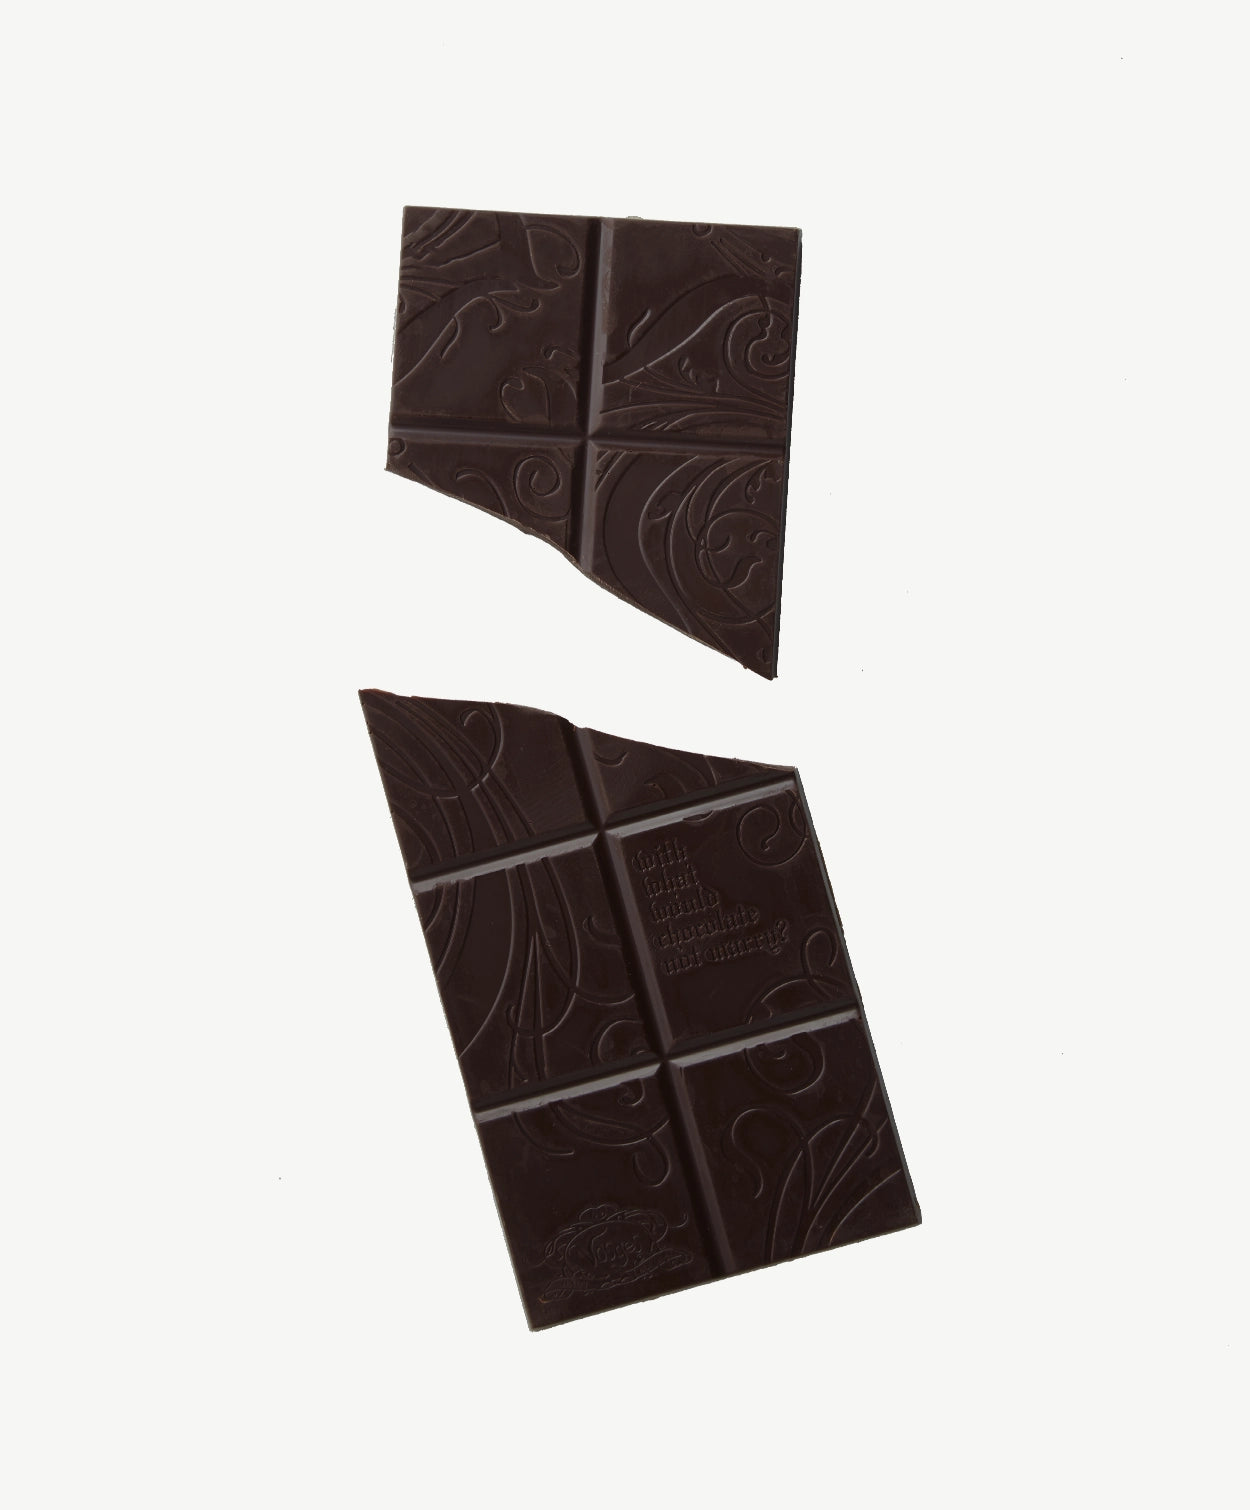 Vosges Mo's Dark Chocolate Bacon Bar broken in two on a light grey background.